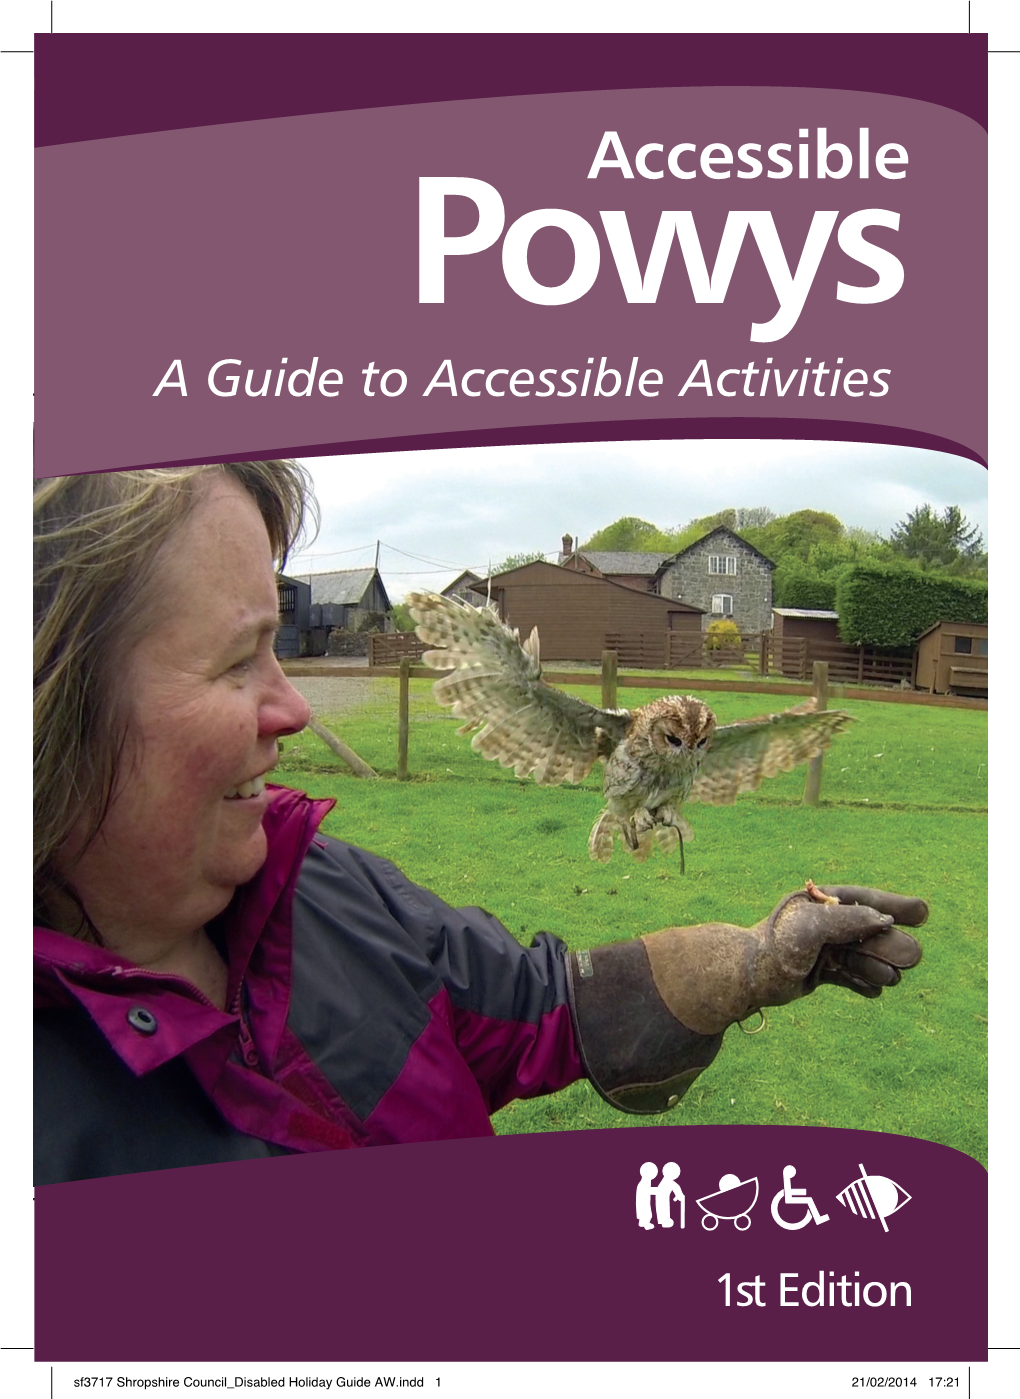 Accessible Powys